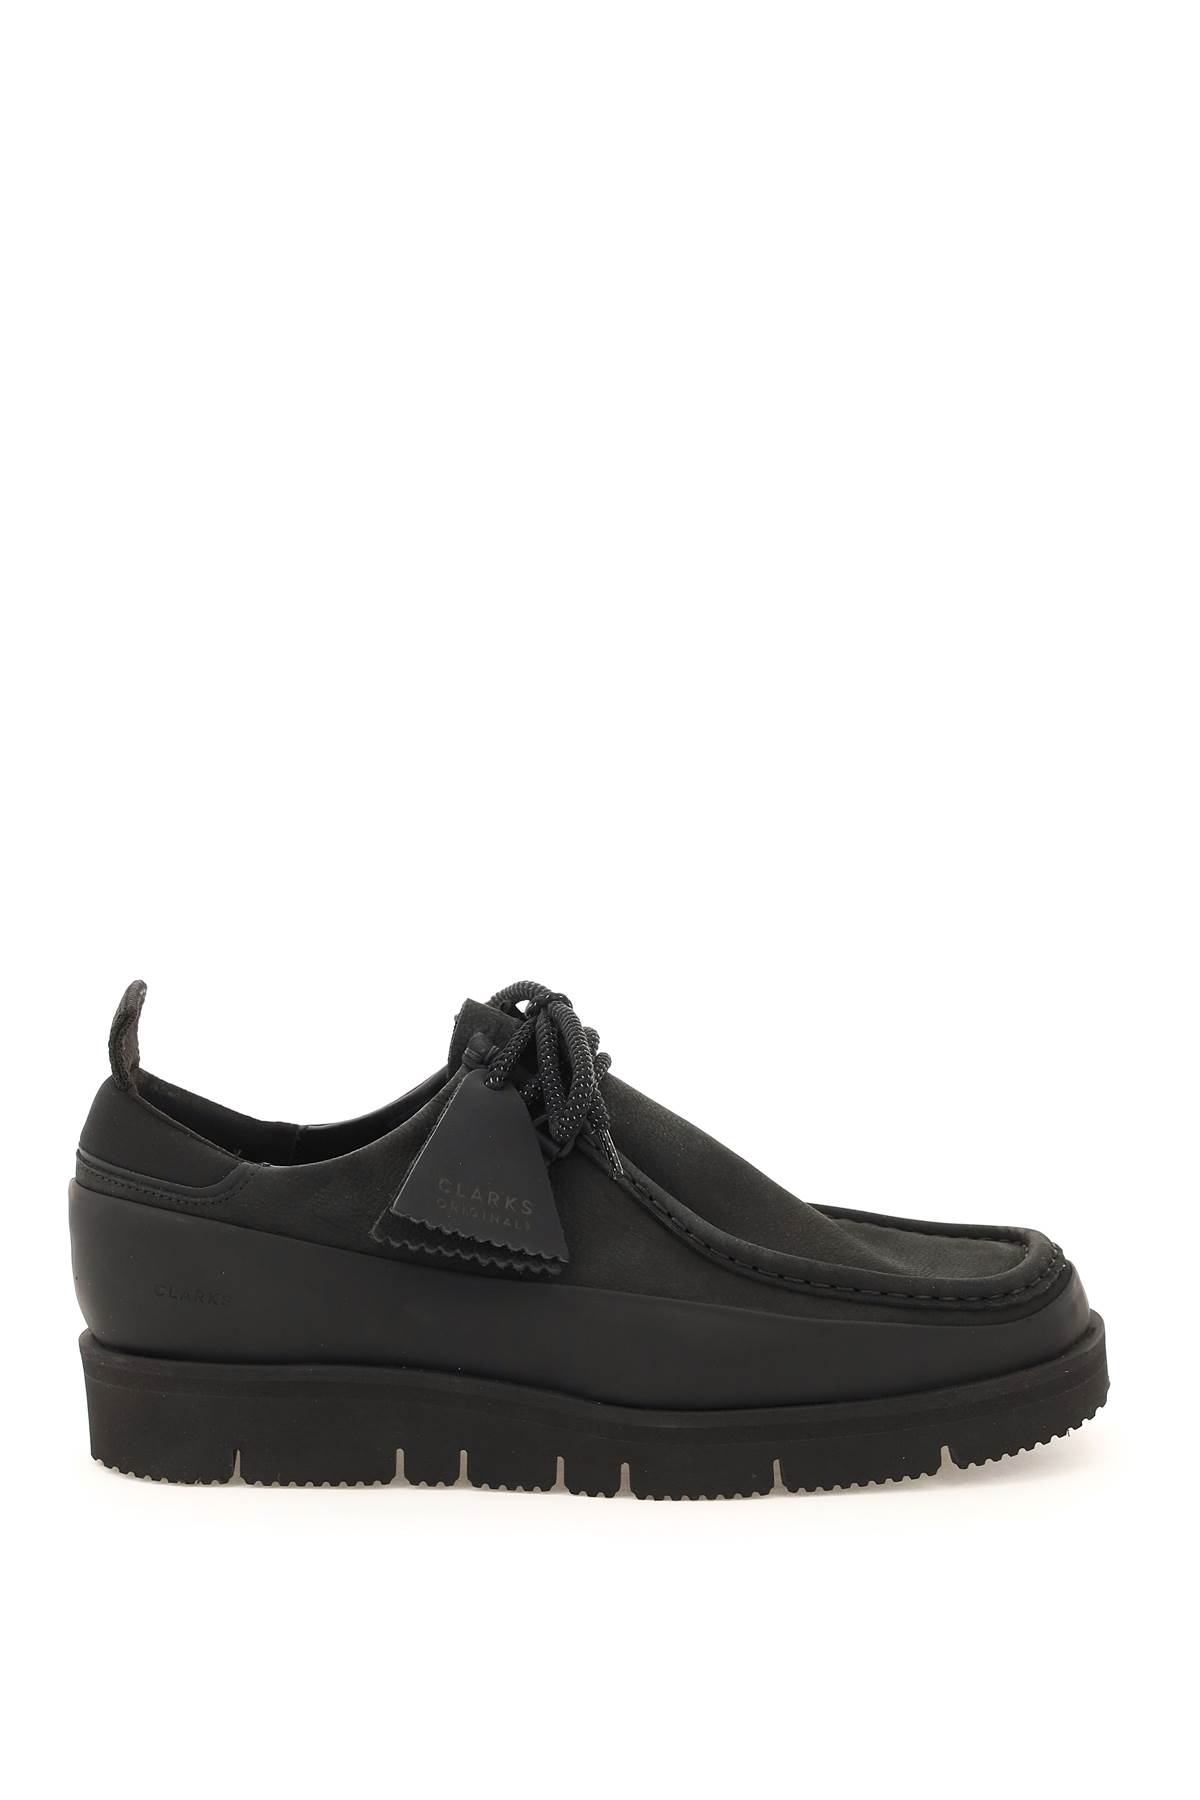 Clarks Wallabee Hiker Lace-up Shoes